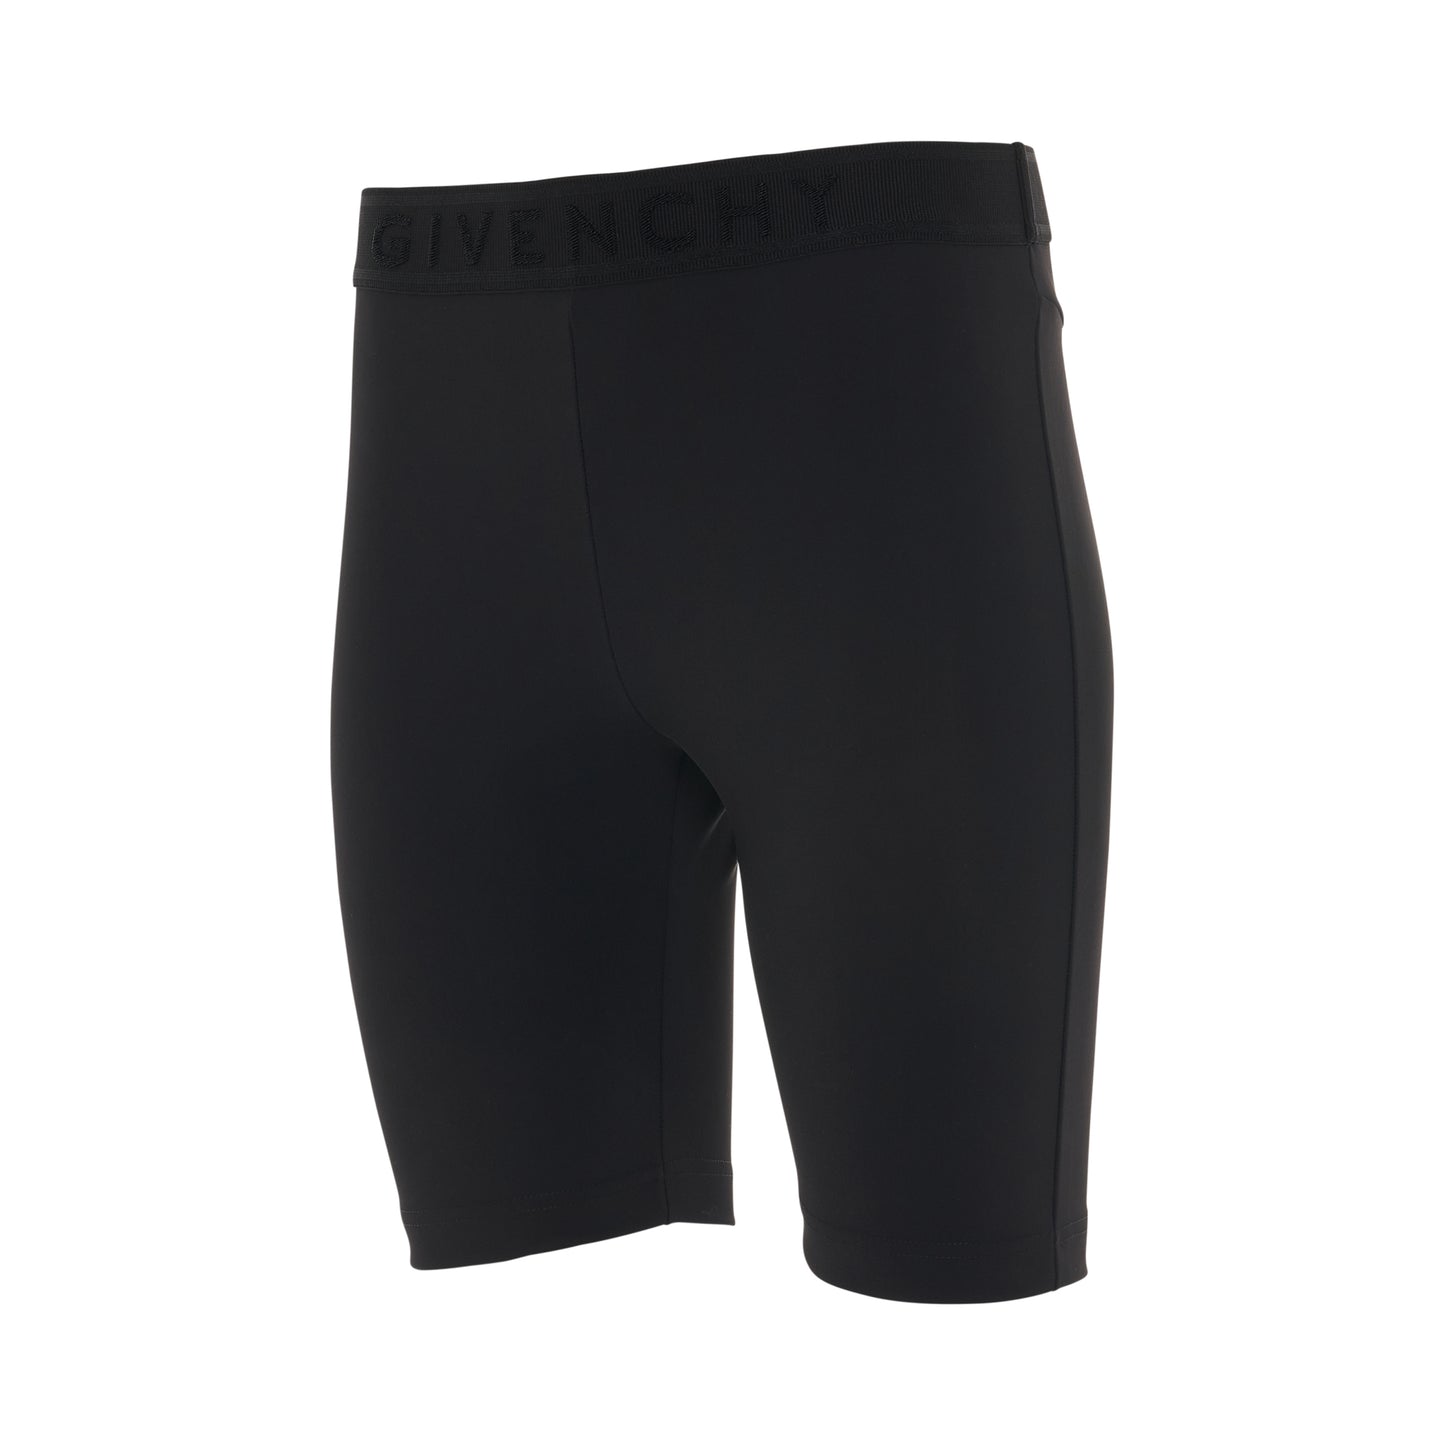 Cyclist Shorts with Elastic Jacquard in Black